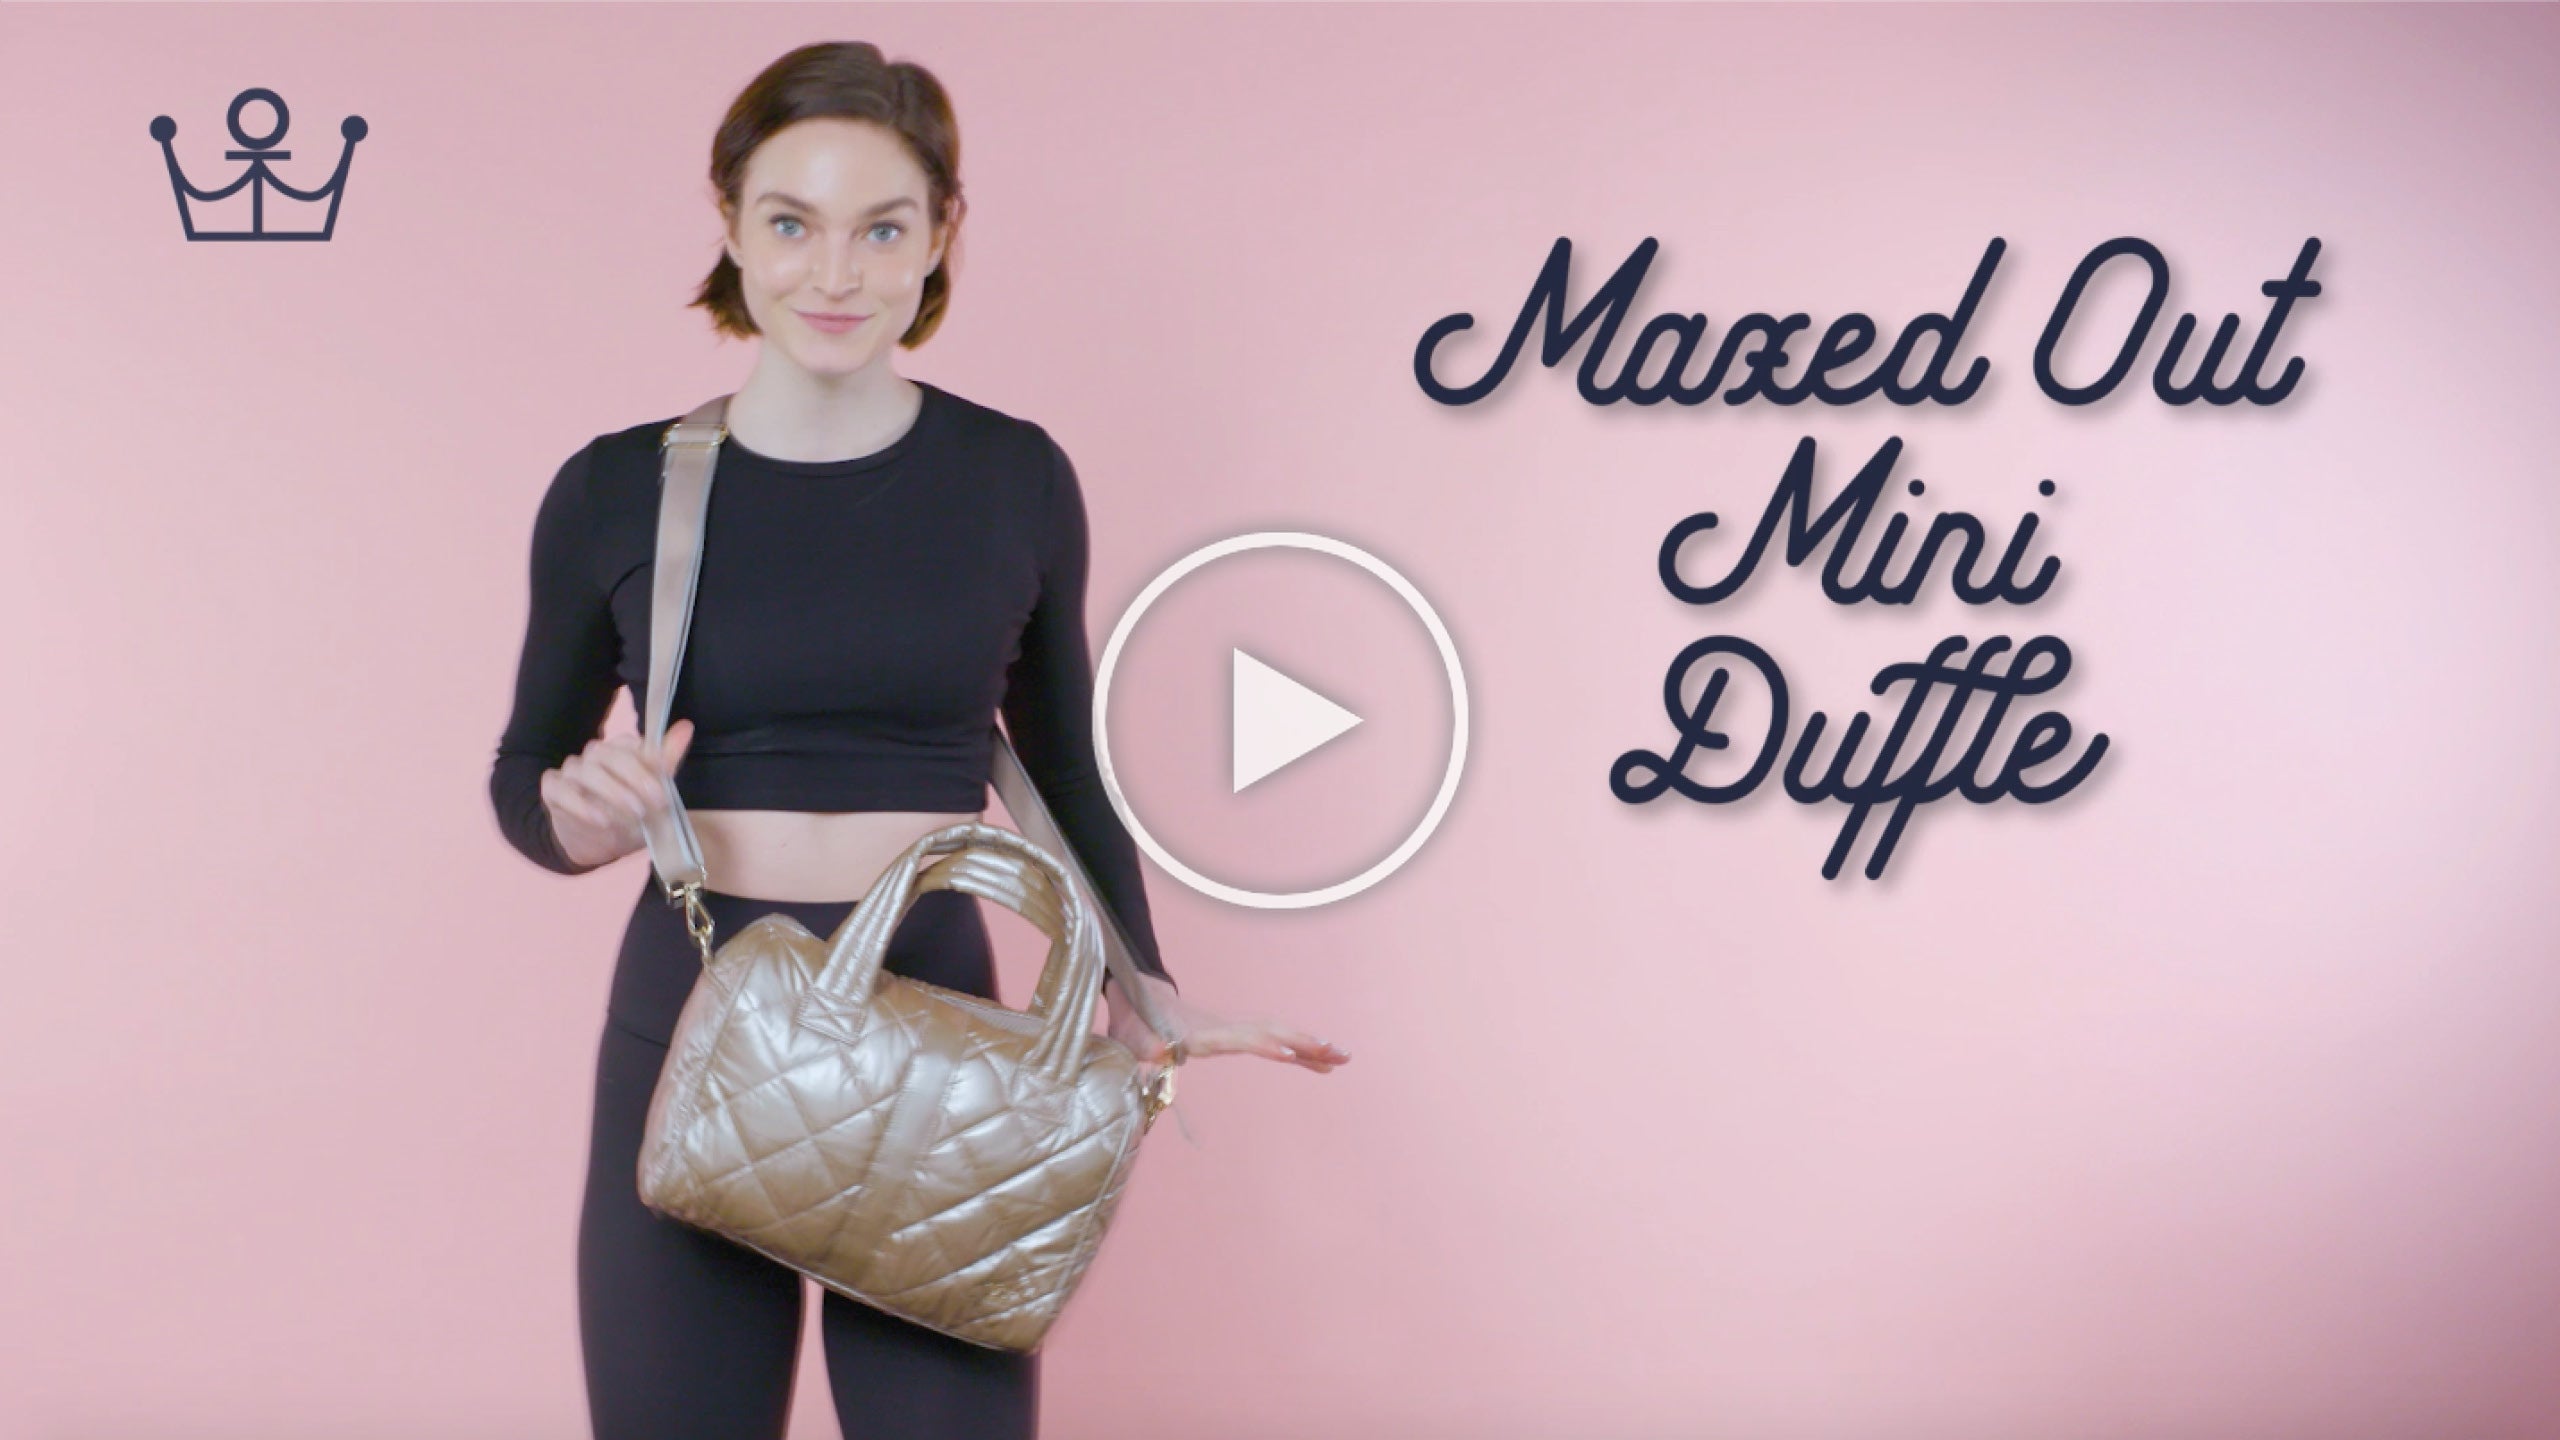 Video of Maxed Out Mini Duffle